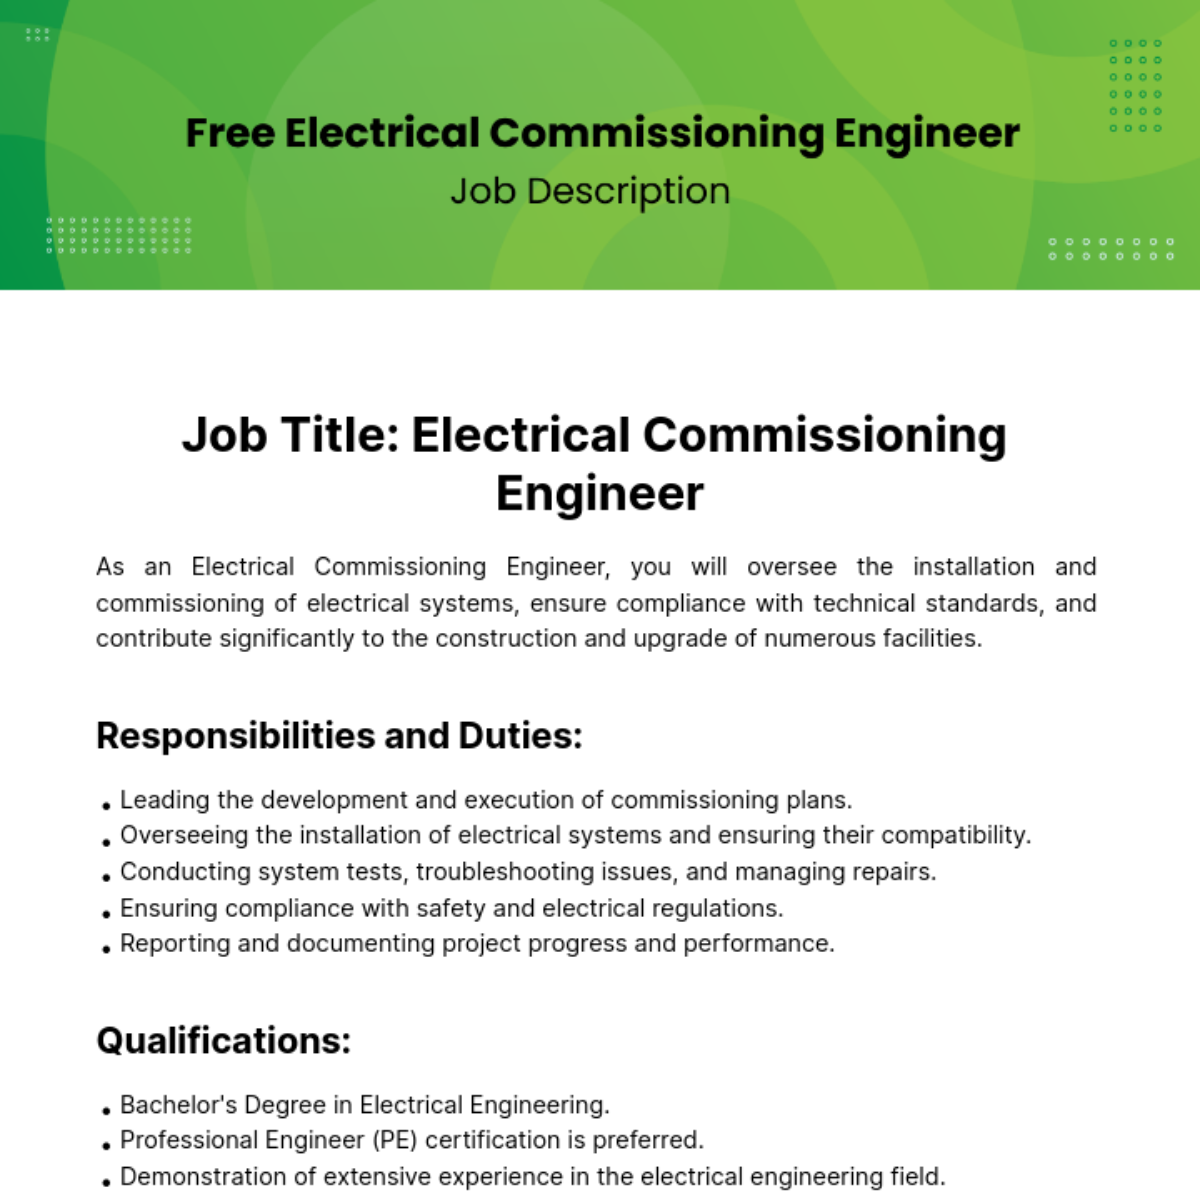 Electrical Commissioning Engineer Job Description Template